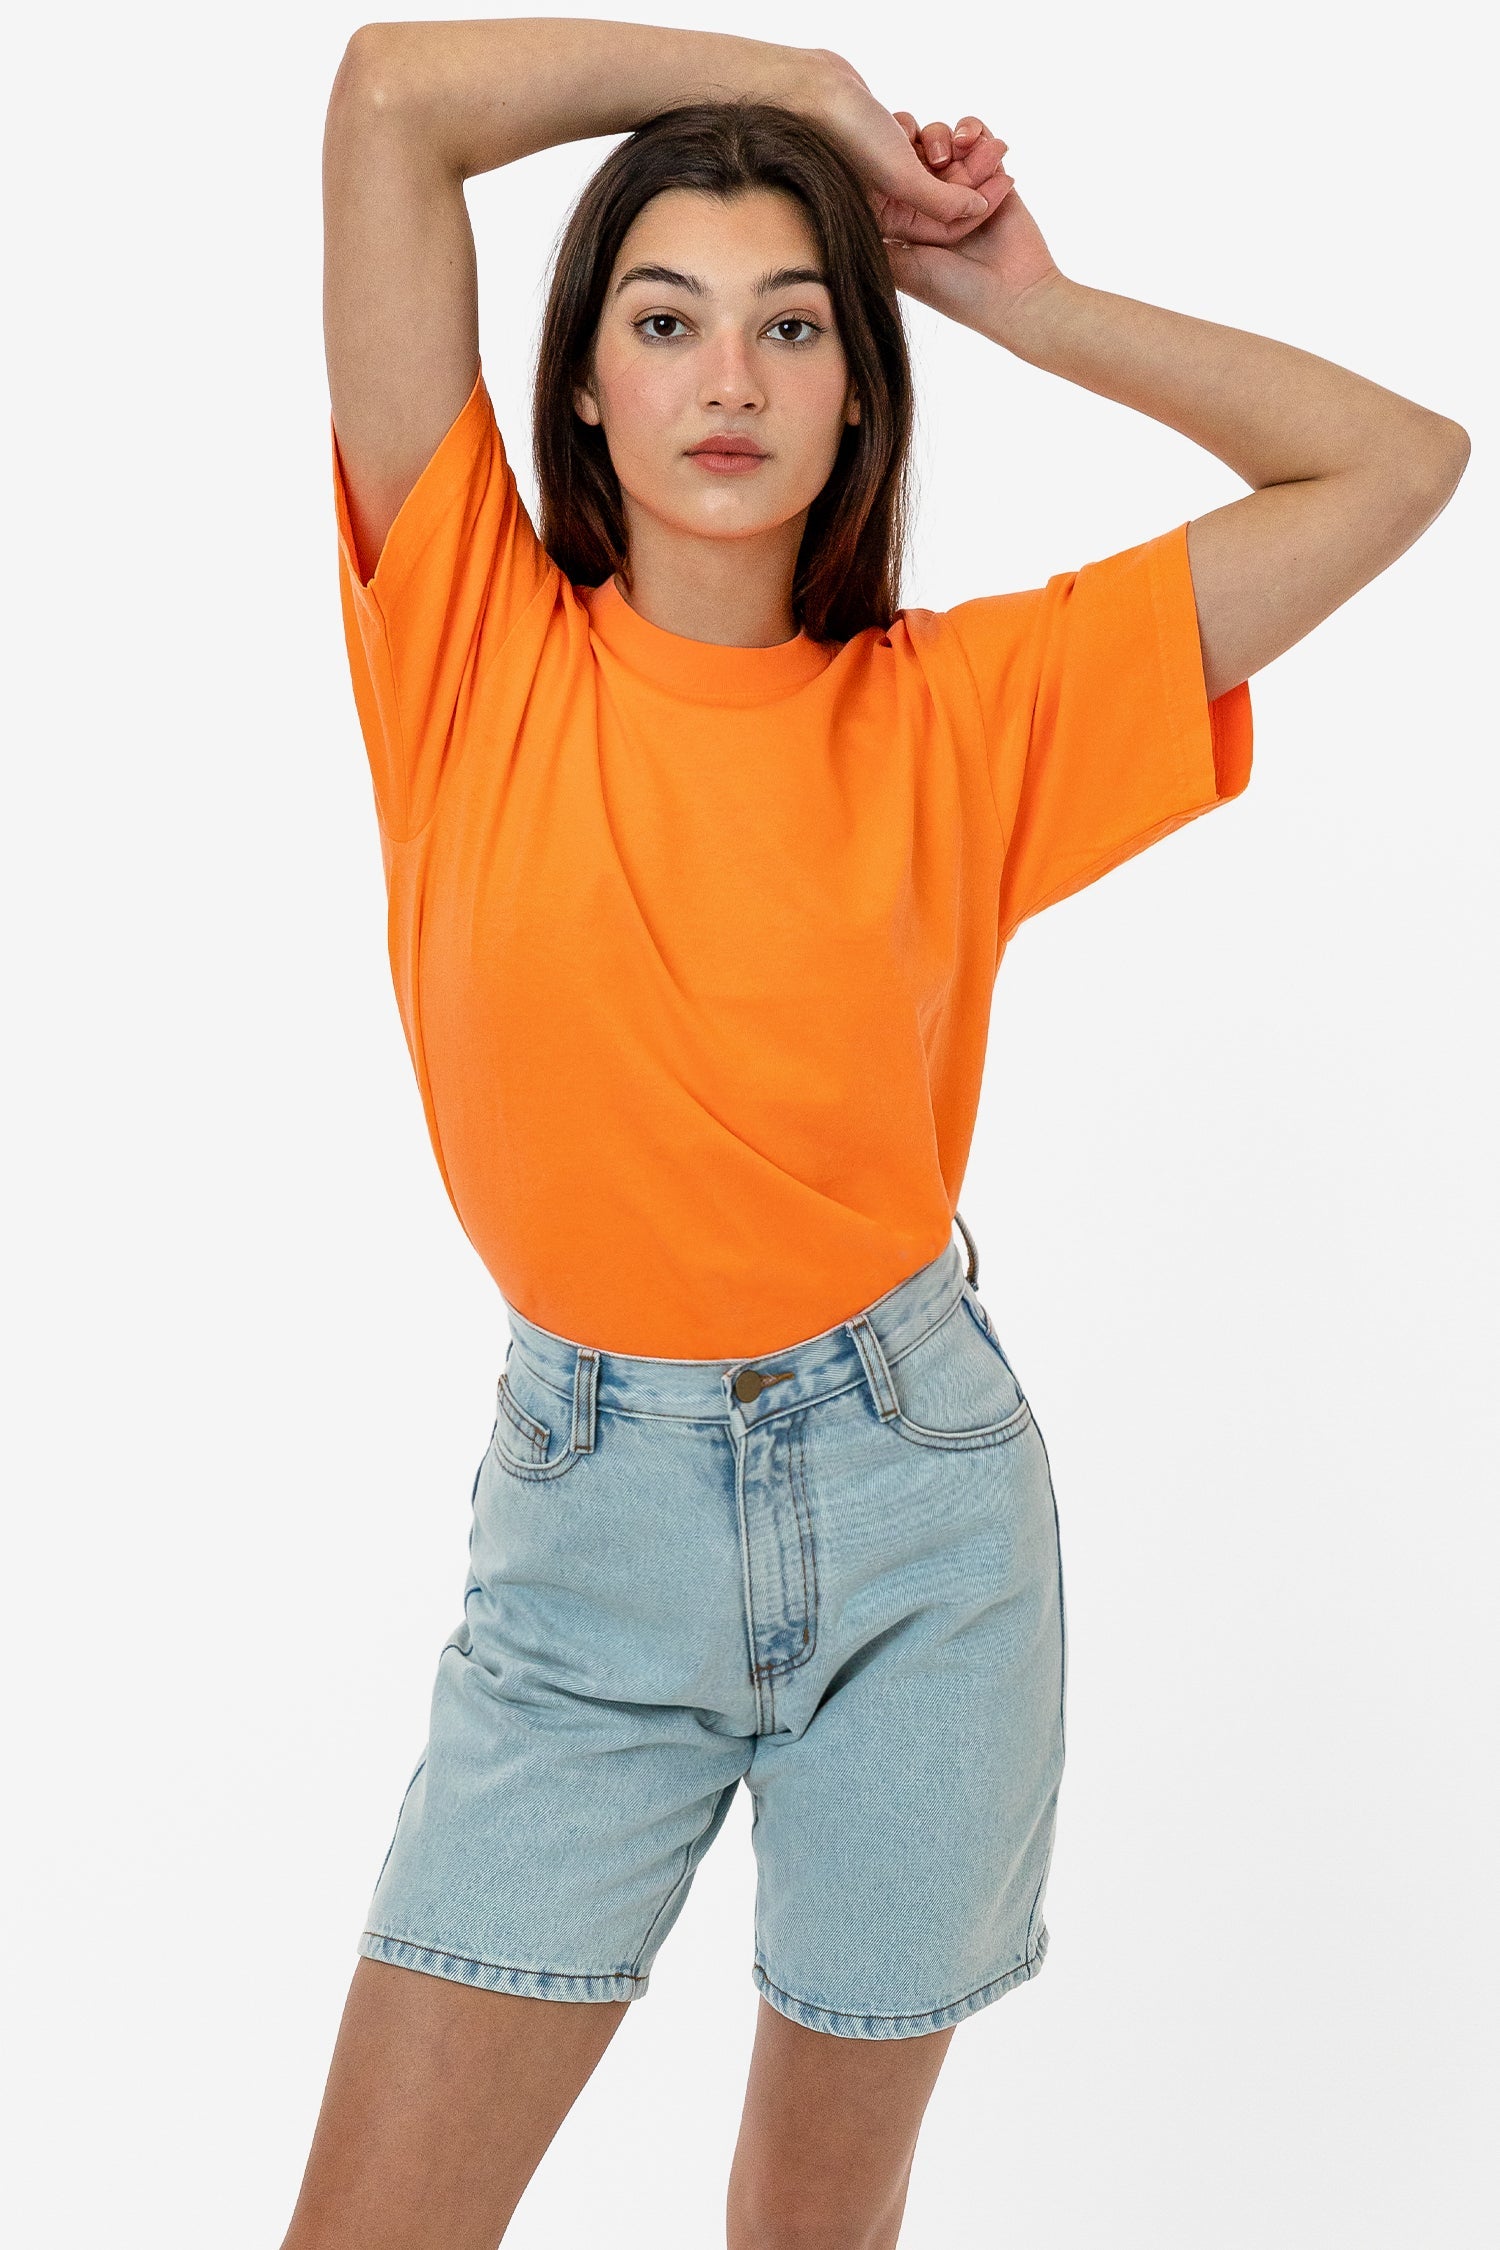 The Oversized Neon Sports T-shirt l RectoVerso sportswear for women -  RectoVerso Sports